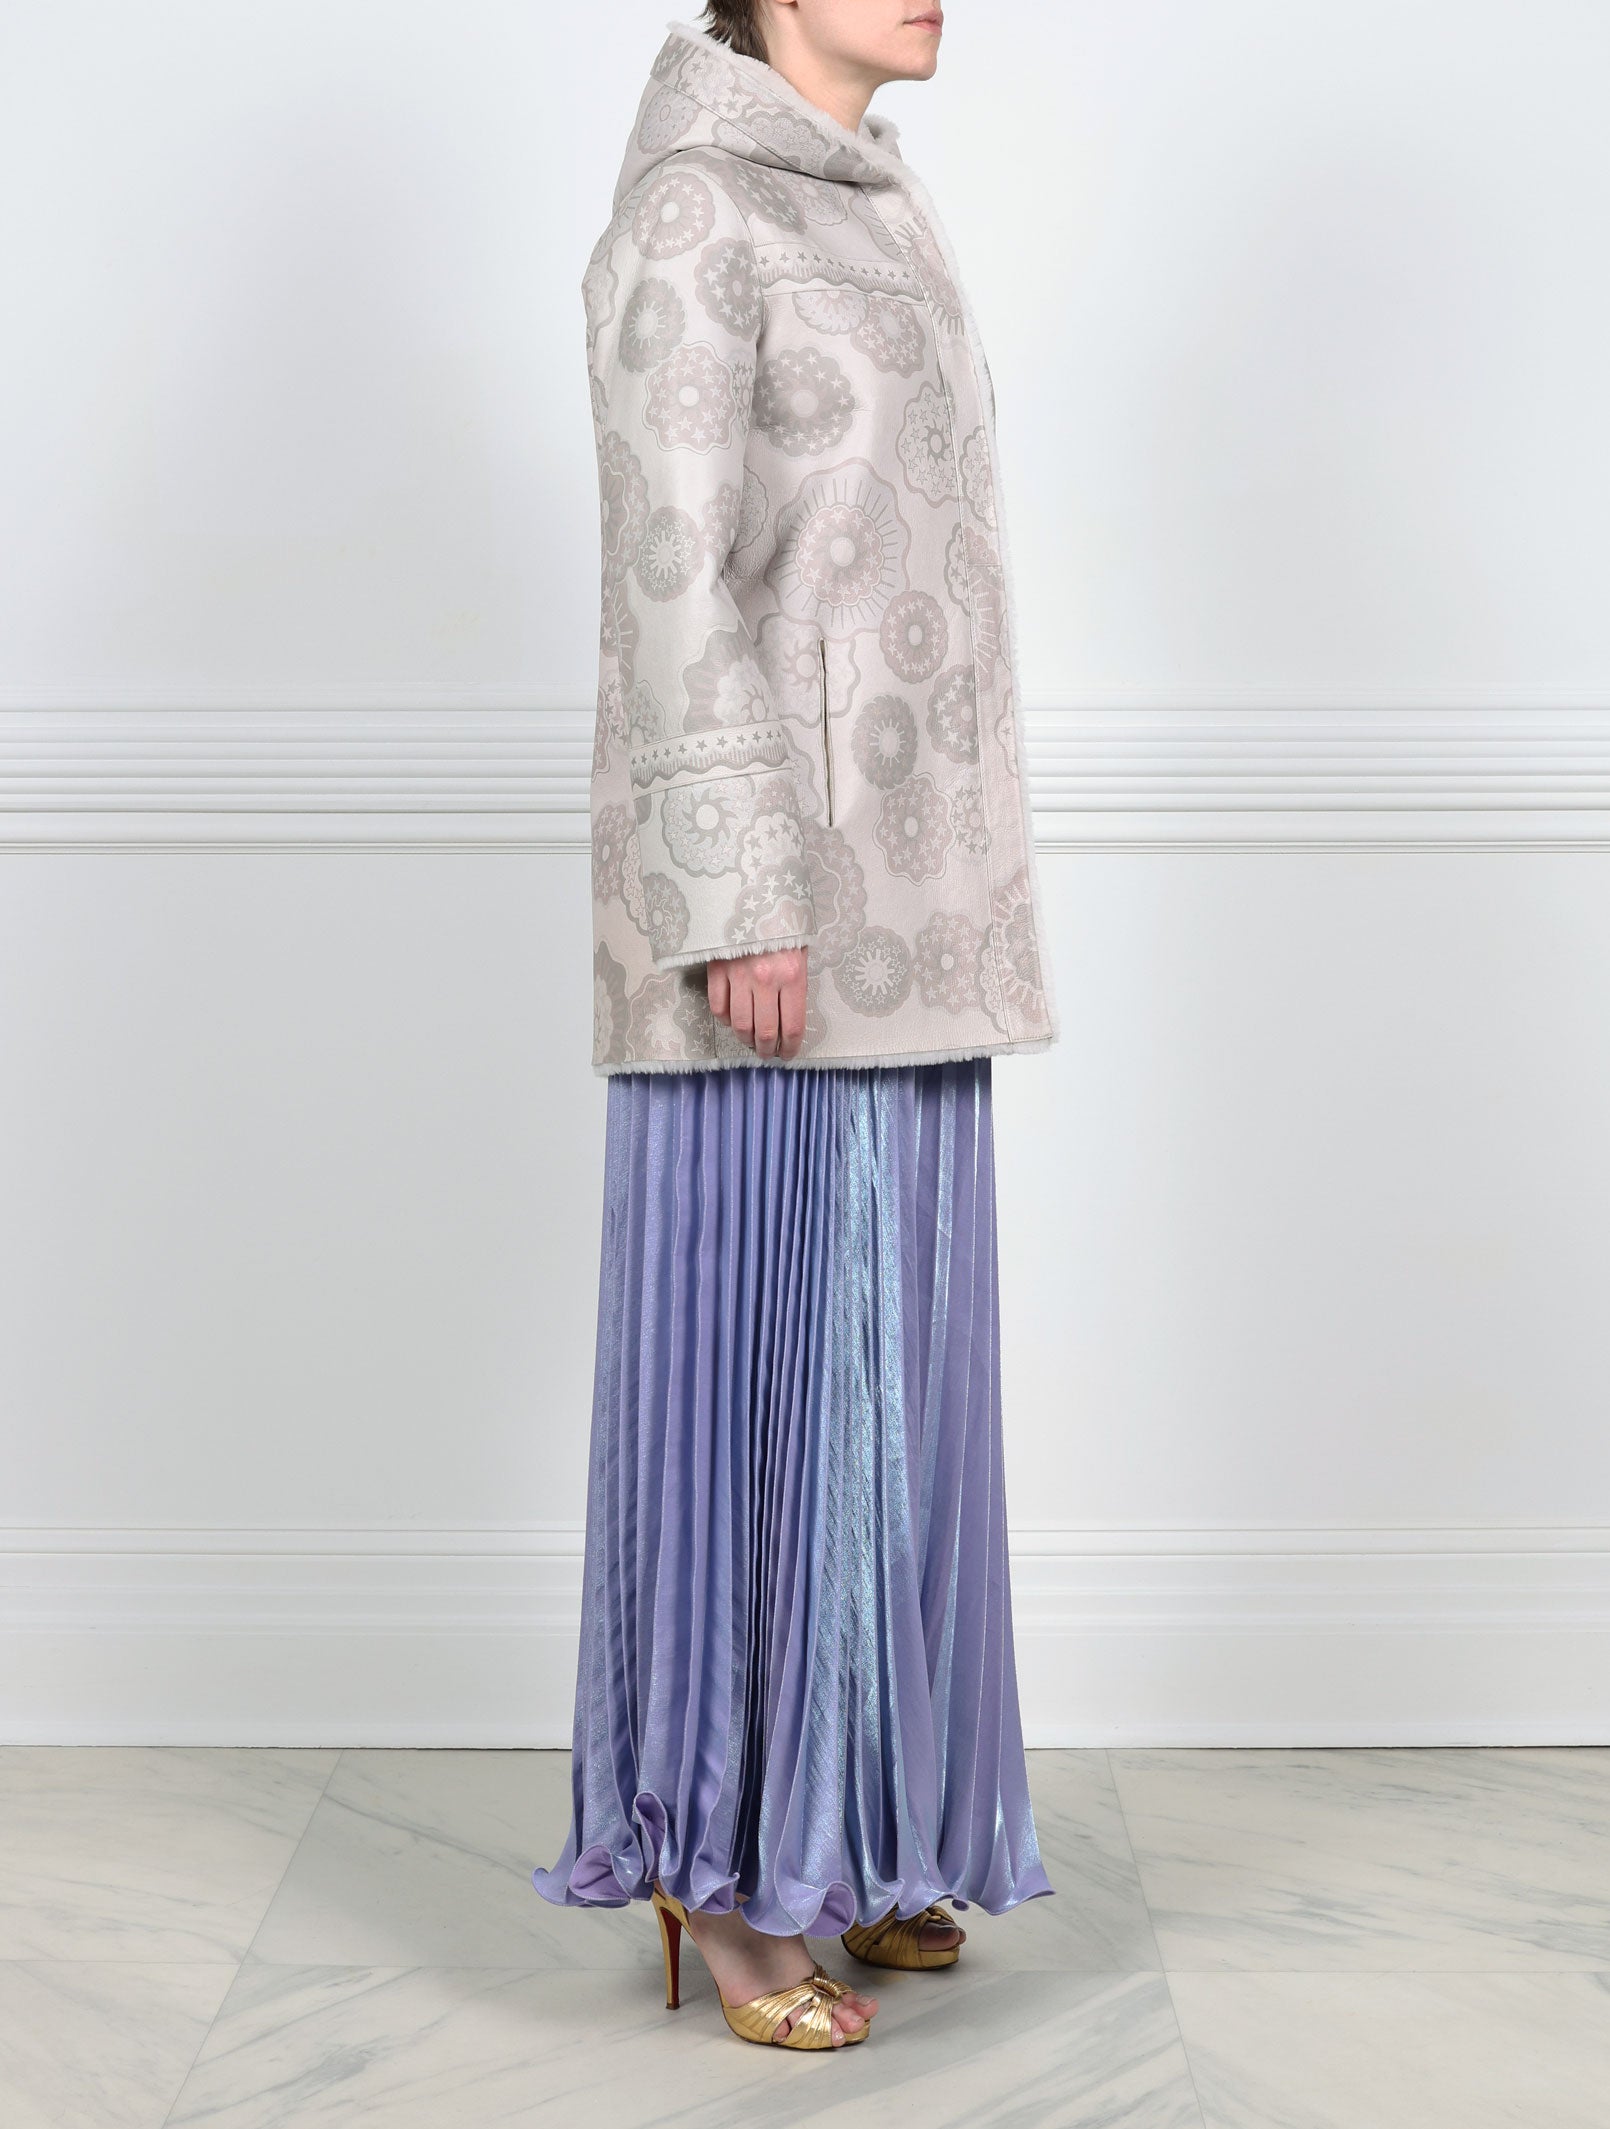 Pologeorgis Knitted Flower Printed Shearling Jacket with Curly Lamb Trim Designed by Zandra Rhodes